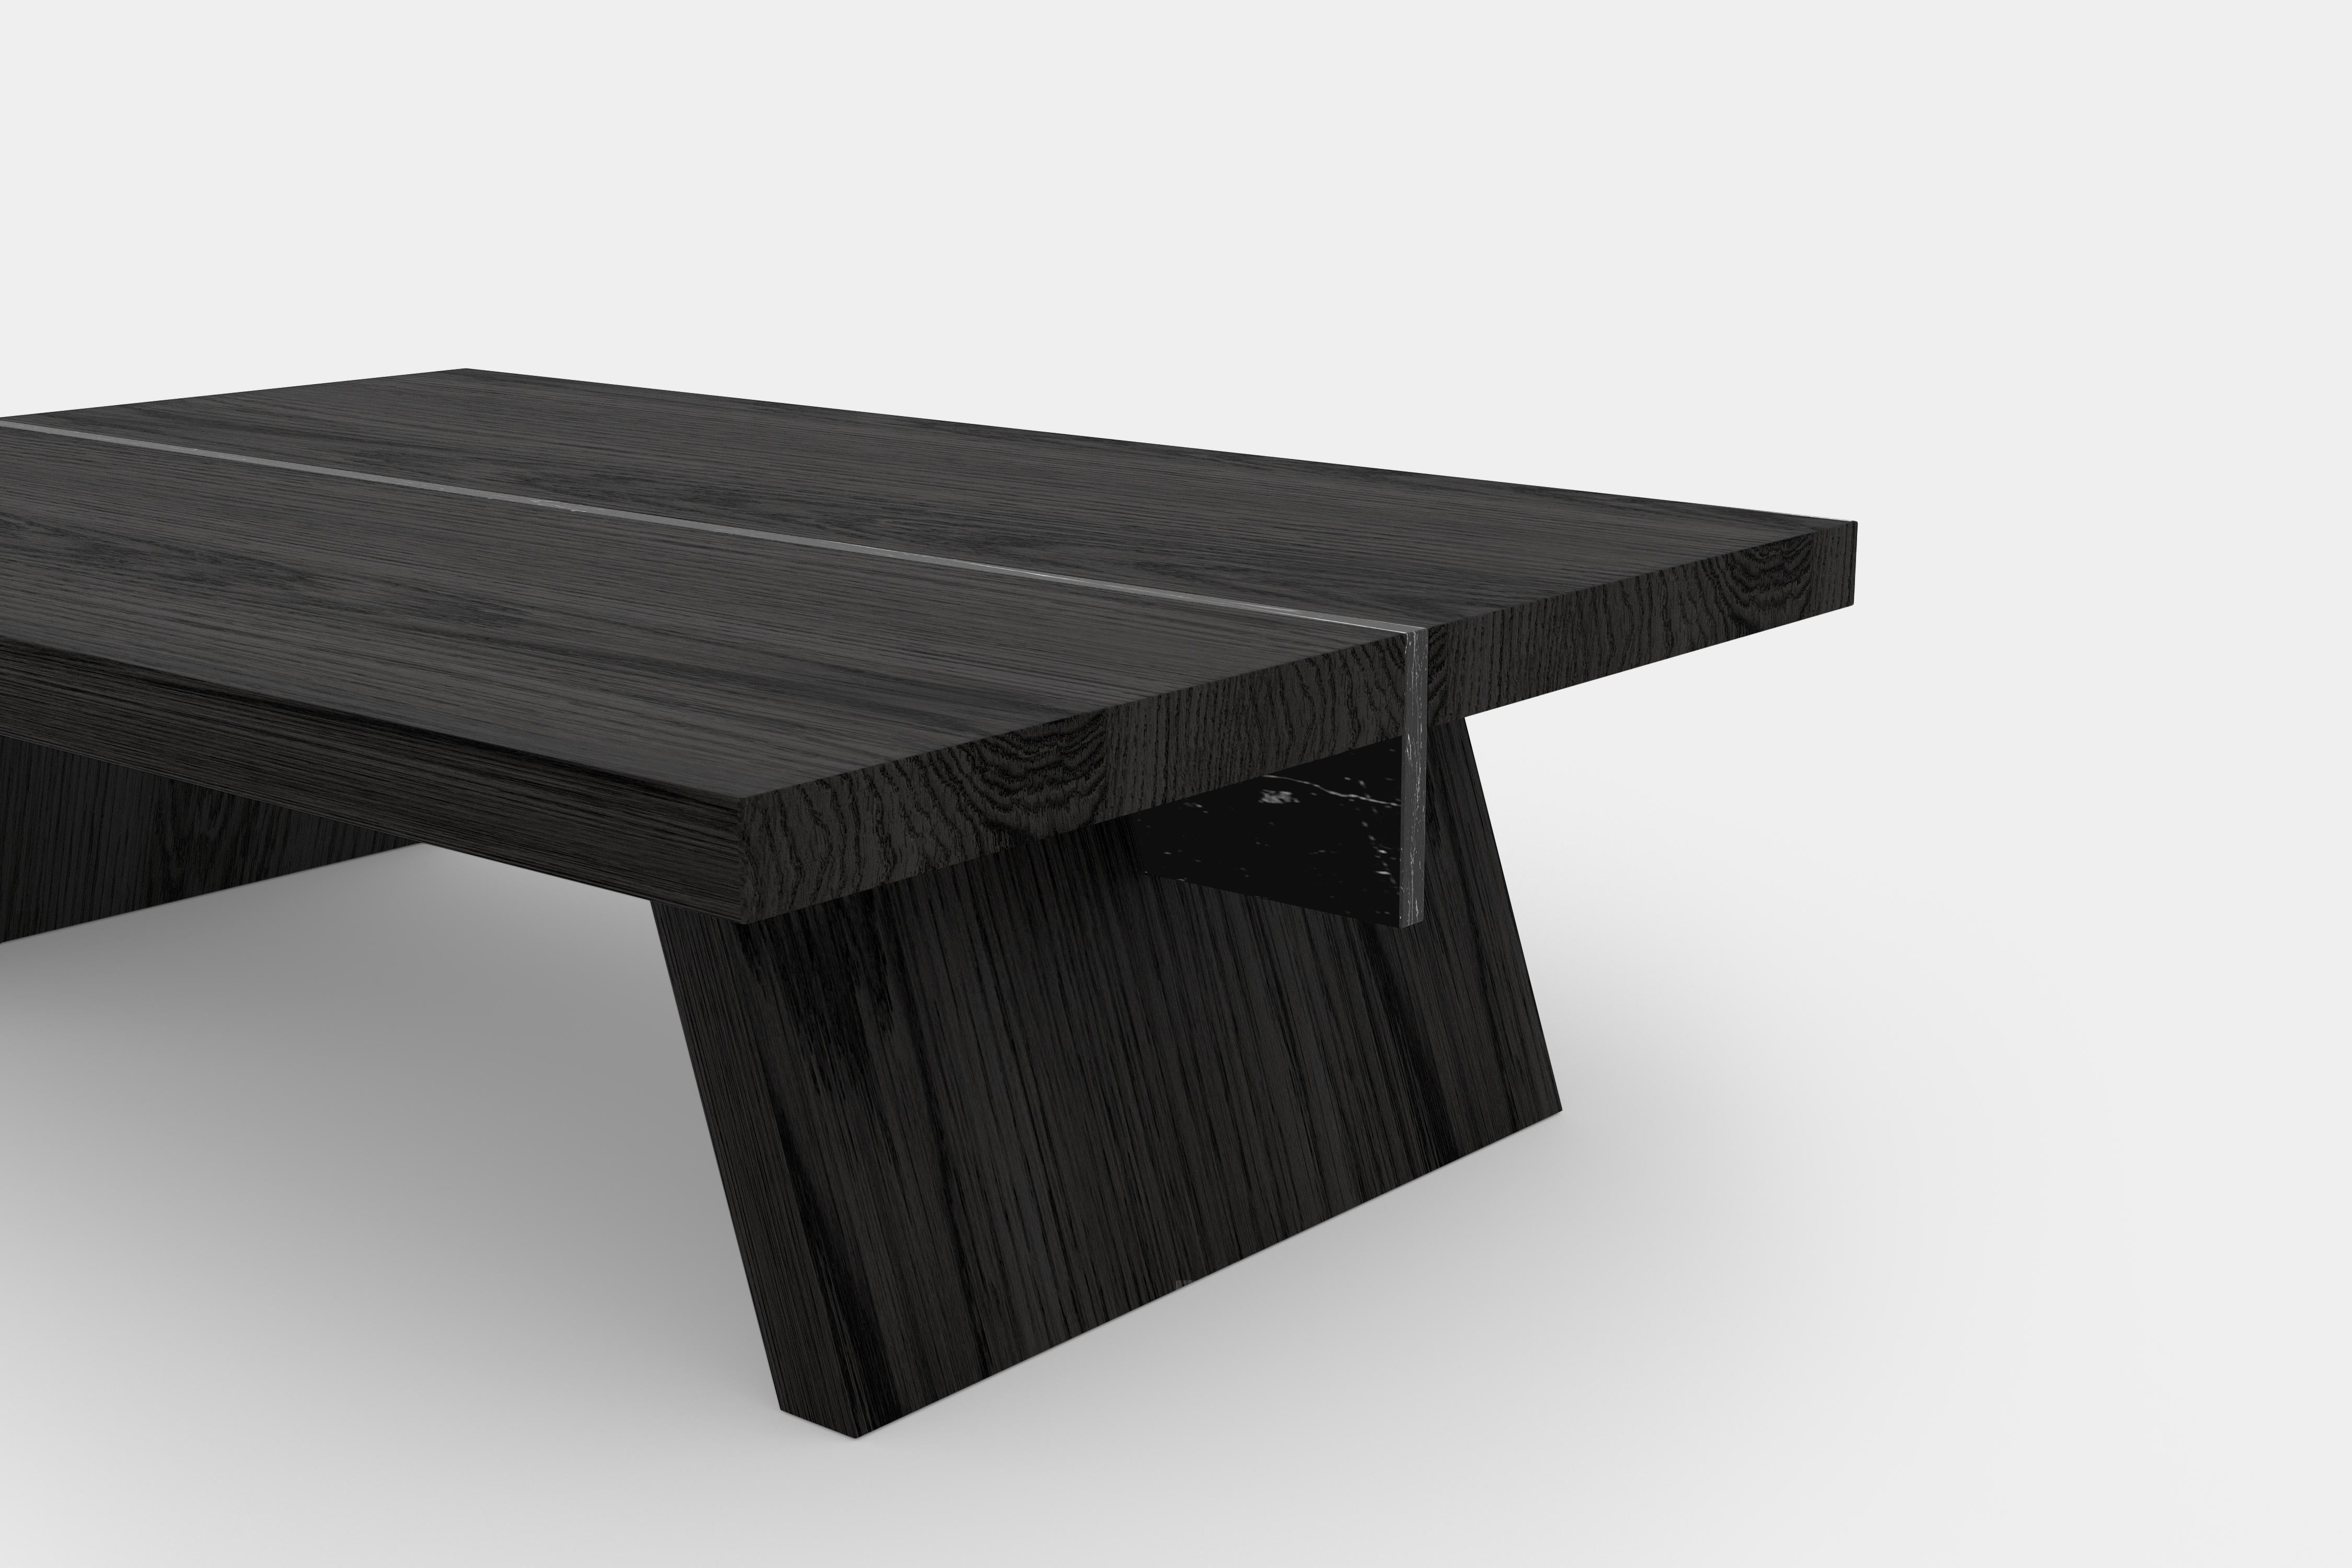 Burnished Laws of Motion Rectangular Coffee Table in Black Solid Wood and Marble by NONO